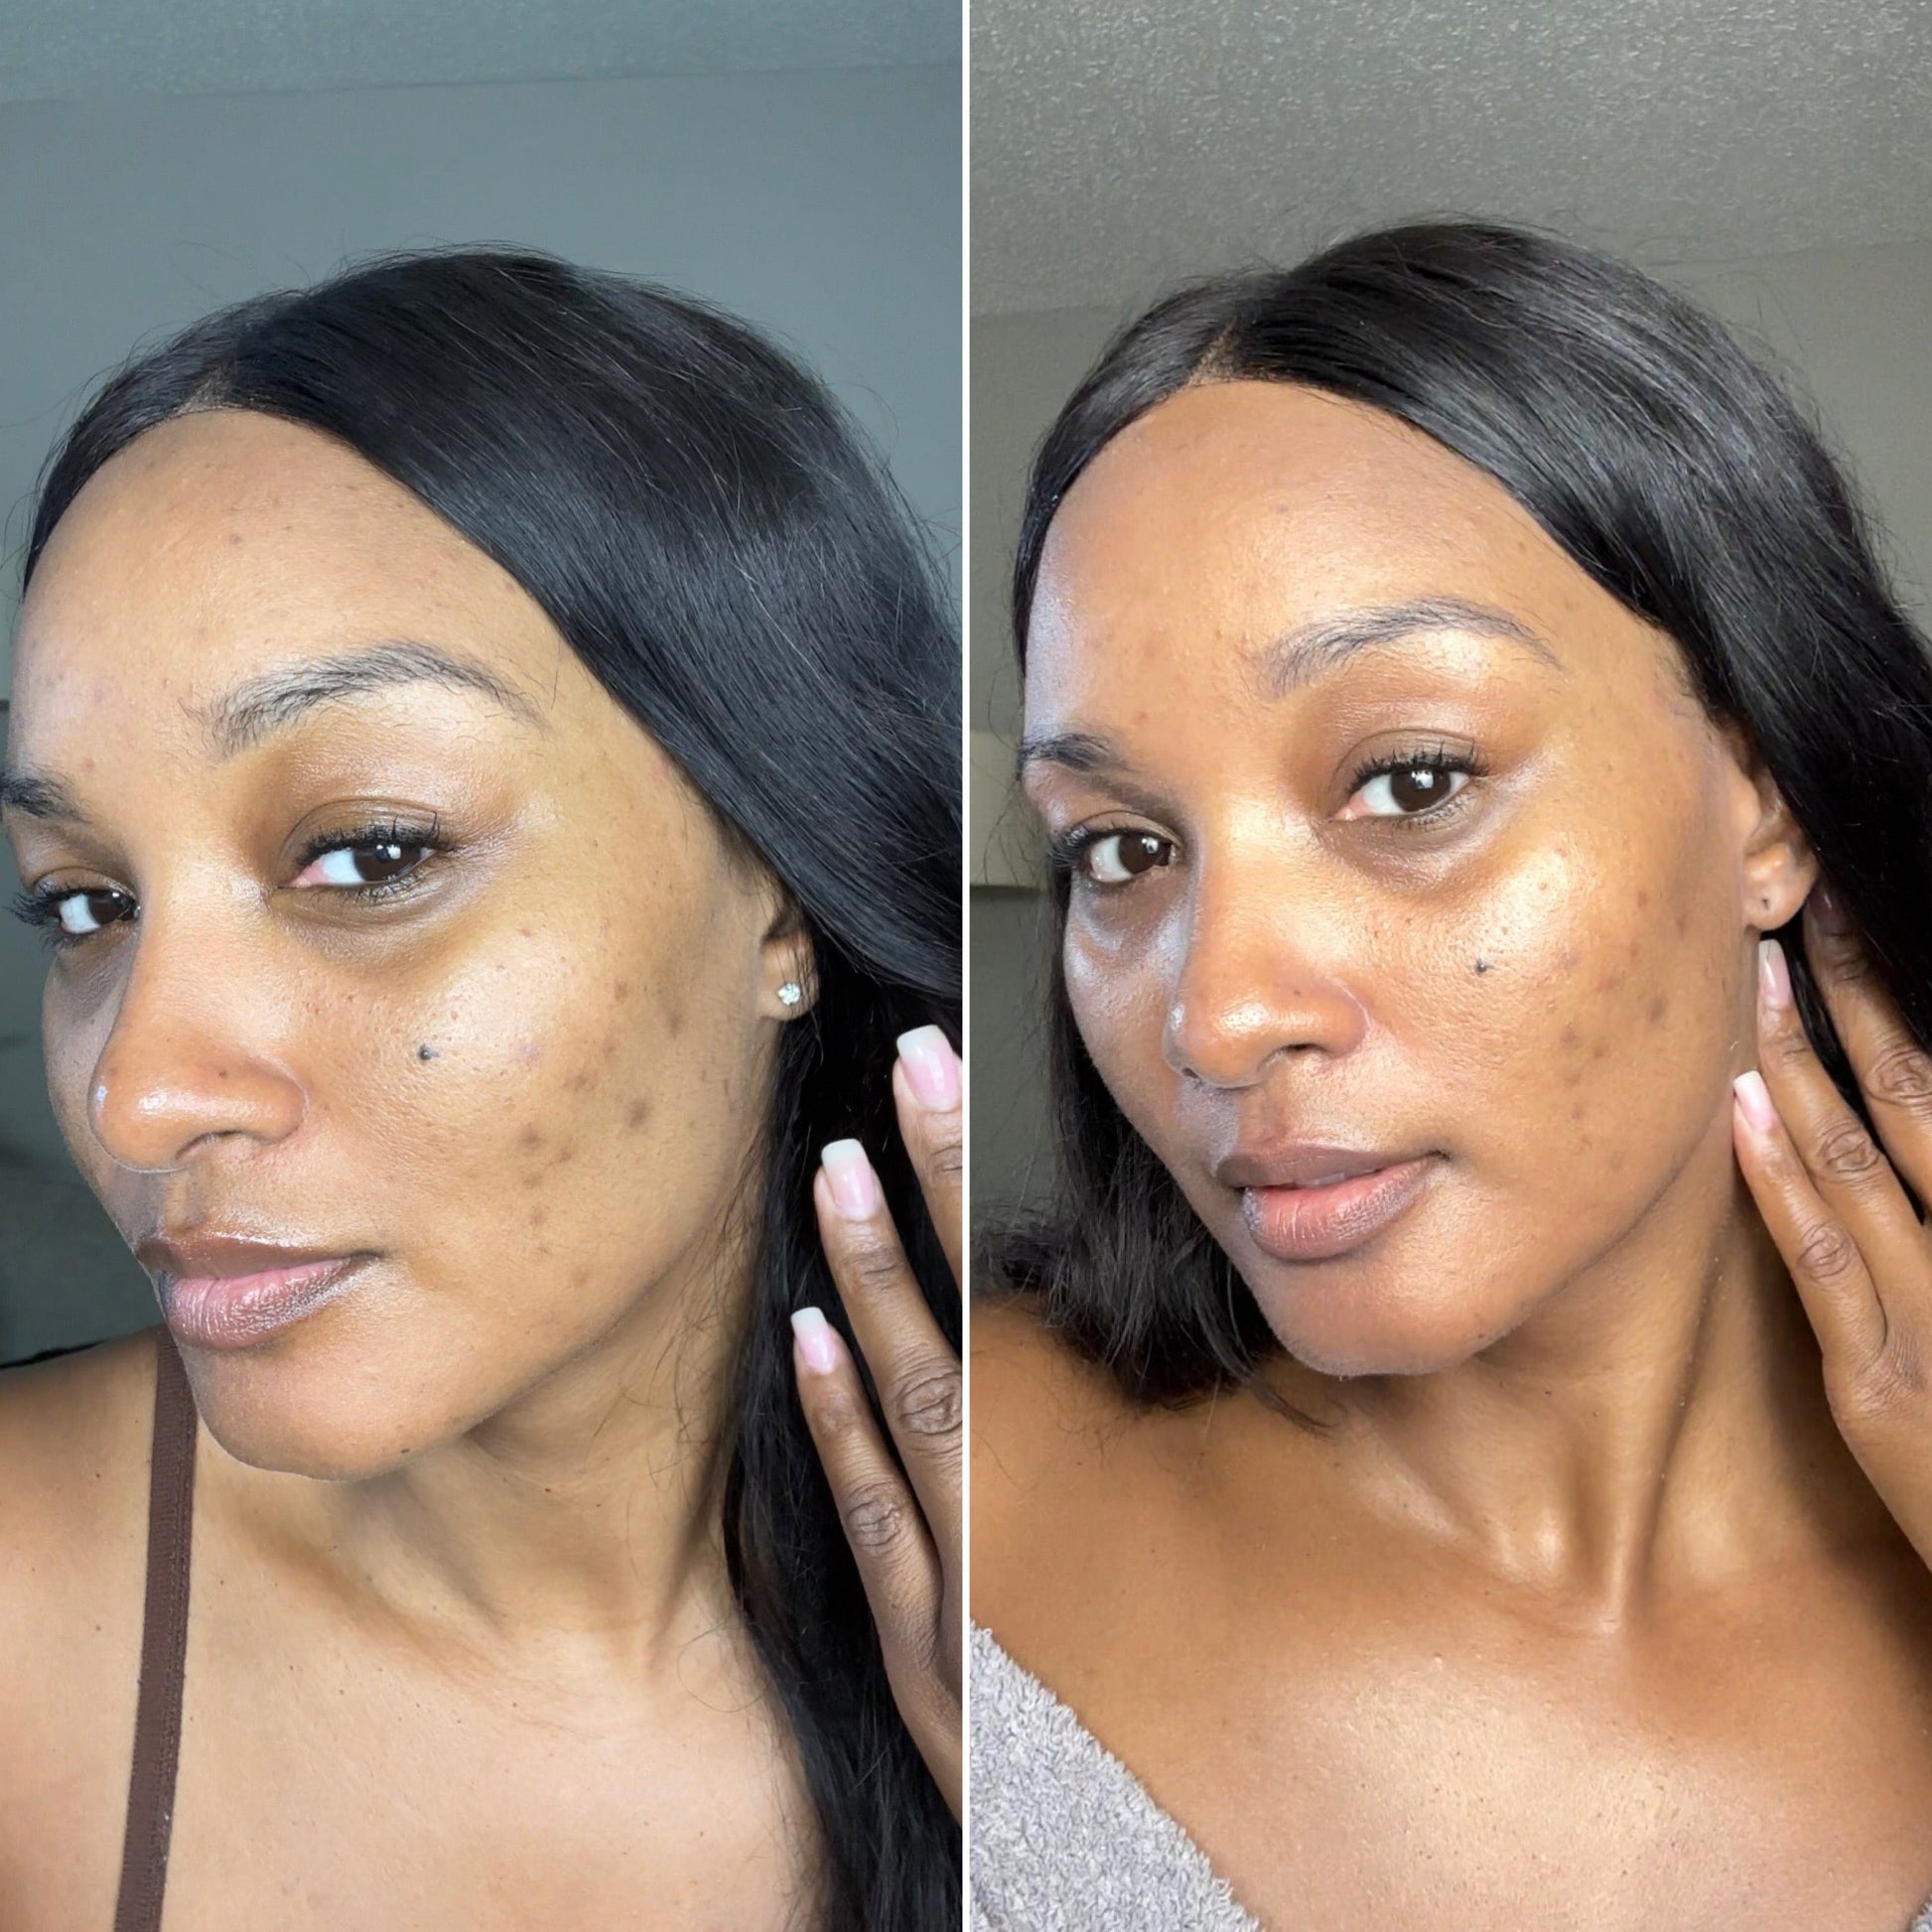  Before and after skincare results of a woman showing clearer complexion, after using SPF.